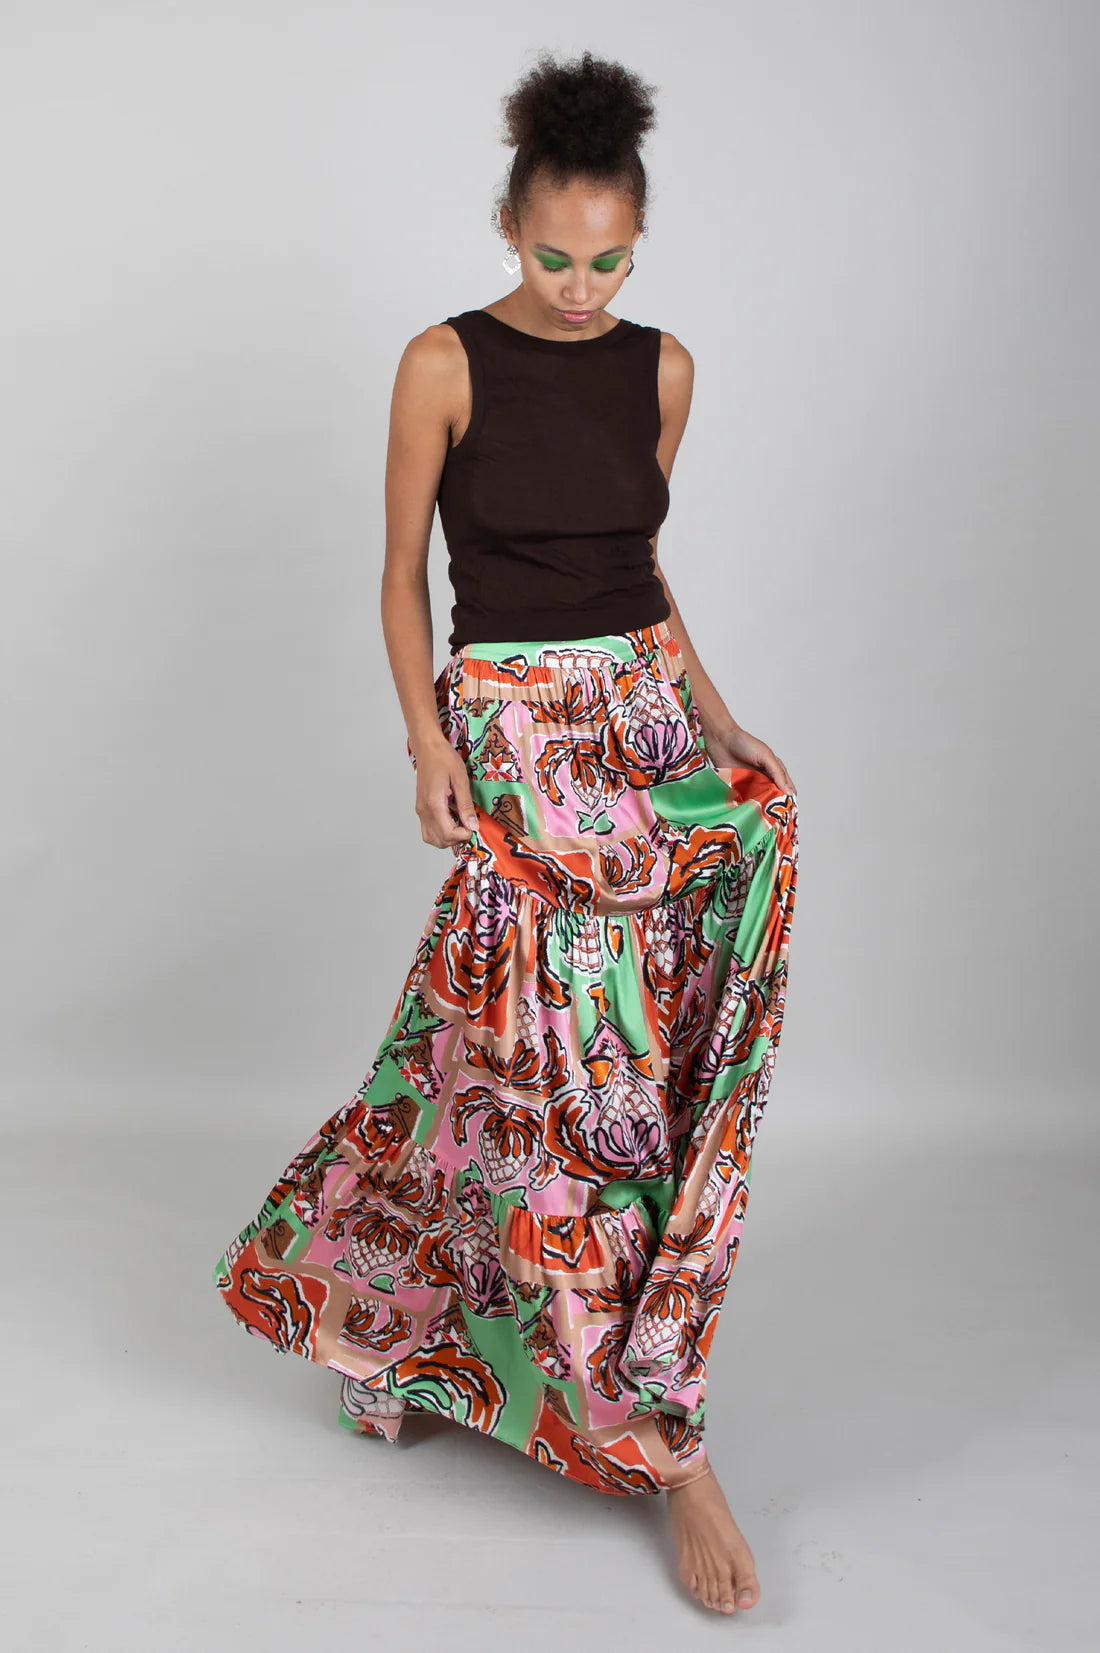 Tiered maxi skirt in green, brown and pink with abstract strawberry design